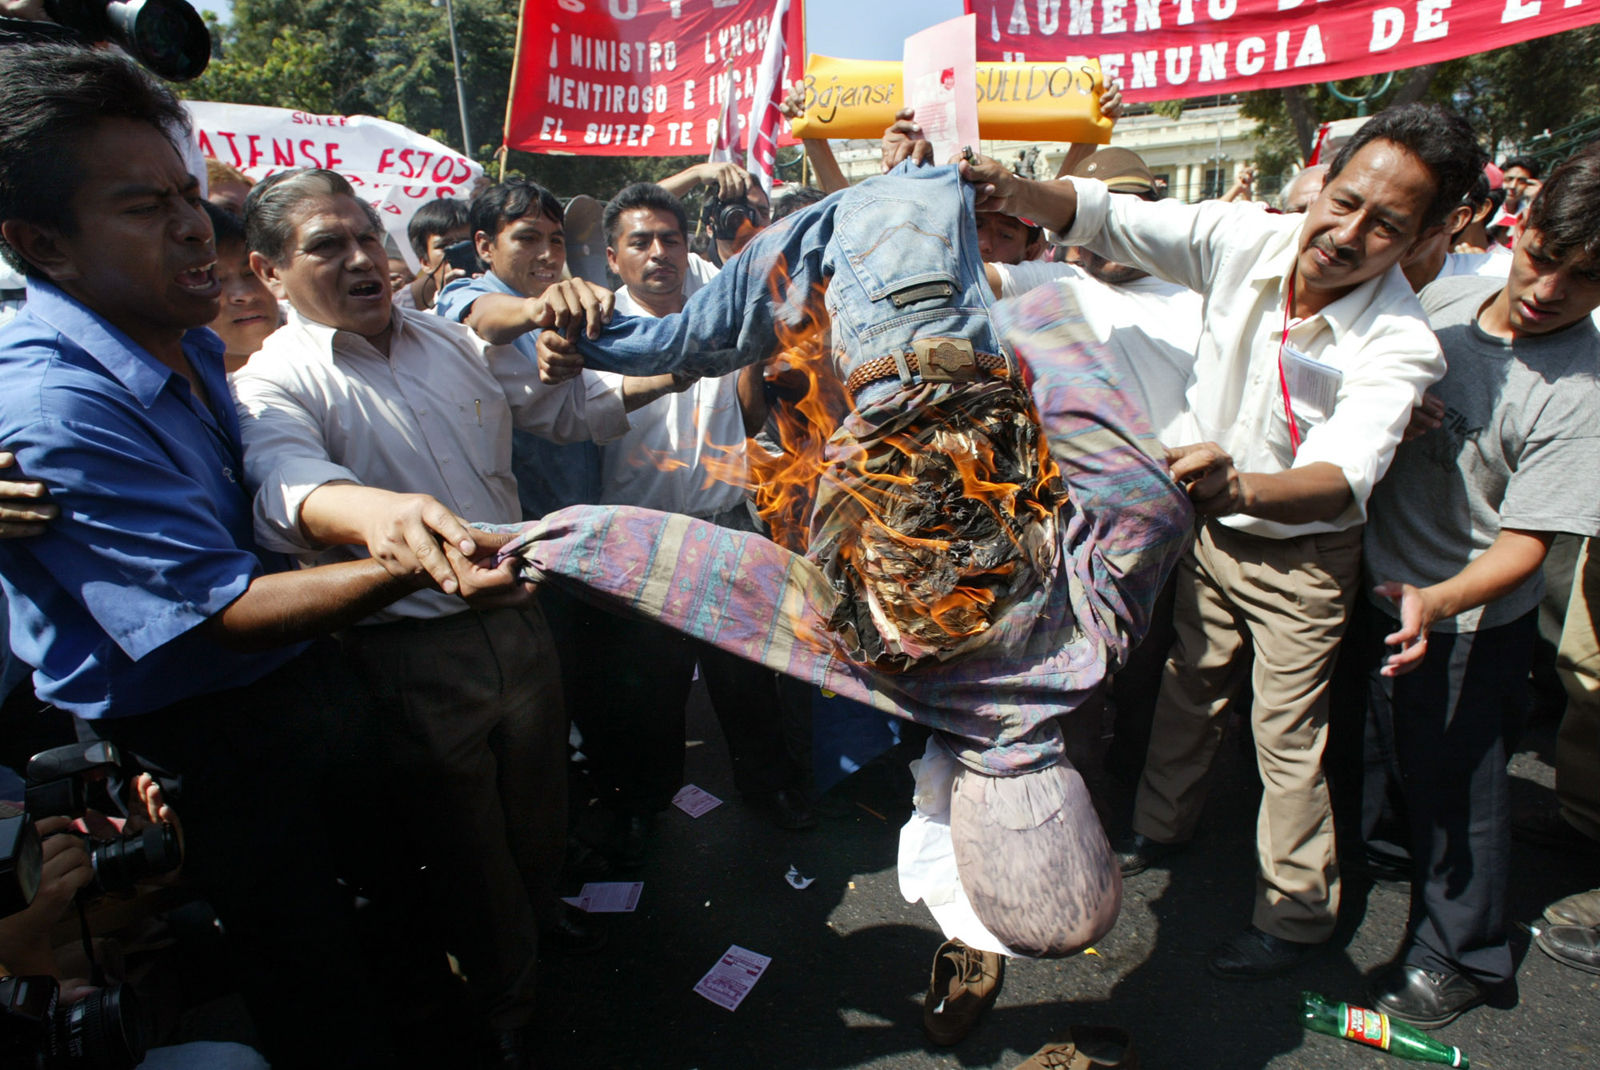 Peruvian teachers protest against President Alejandro Toledo, burning a dummy depicting the Education Minister Nicolas Lynch in front of the Congress building in Lima on Tuesday, May 14, 2002. Several unions and regional civic groups called a day of national protest and strikes against the government, the first under President Alejandro Toledo's nine-month government. Marches in Lima began peacefully, while traffic flowed freely and there were no major disturbances in the capital. (AP Photo/Silvia Izquierdo)